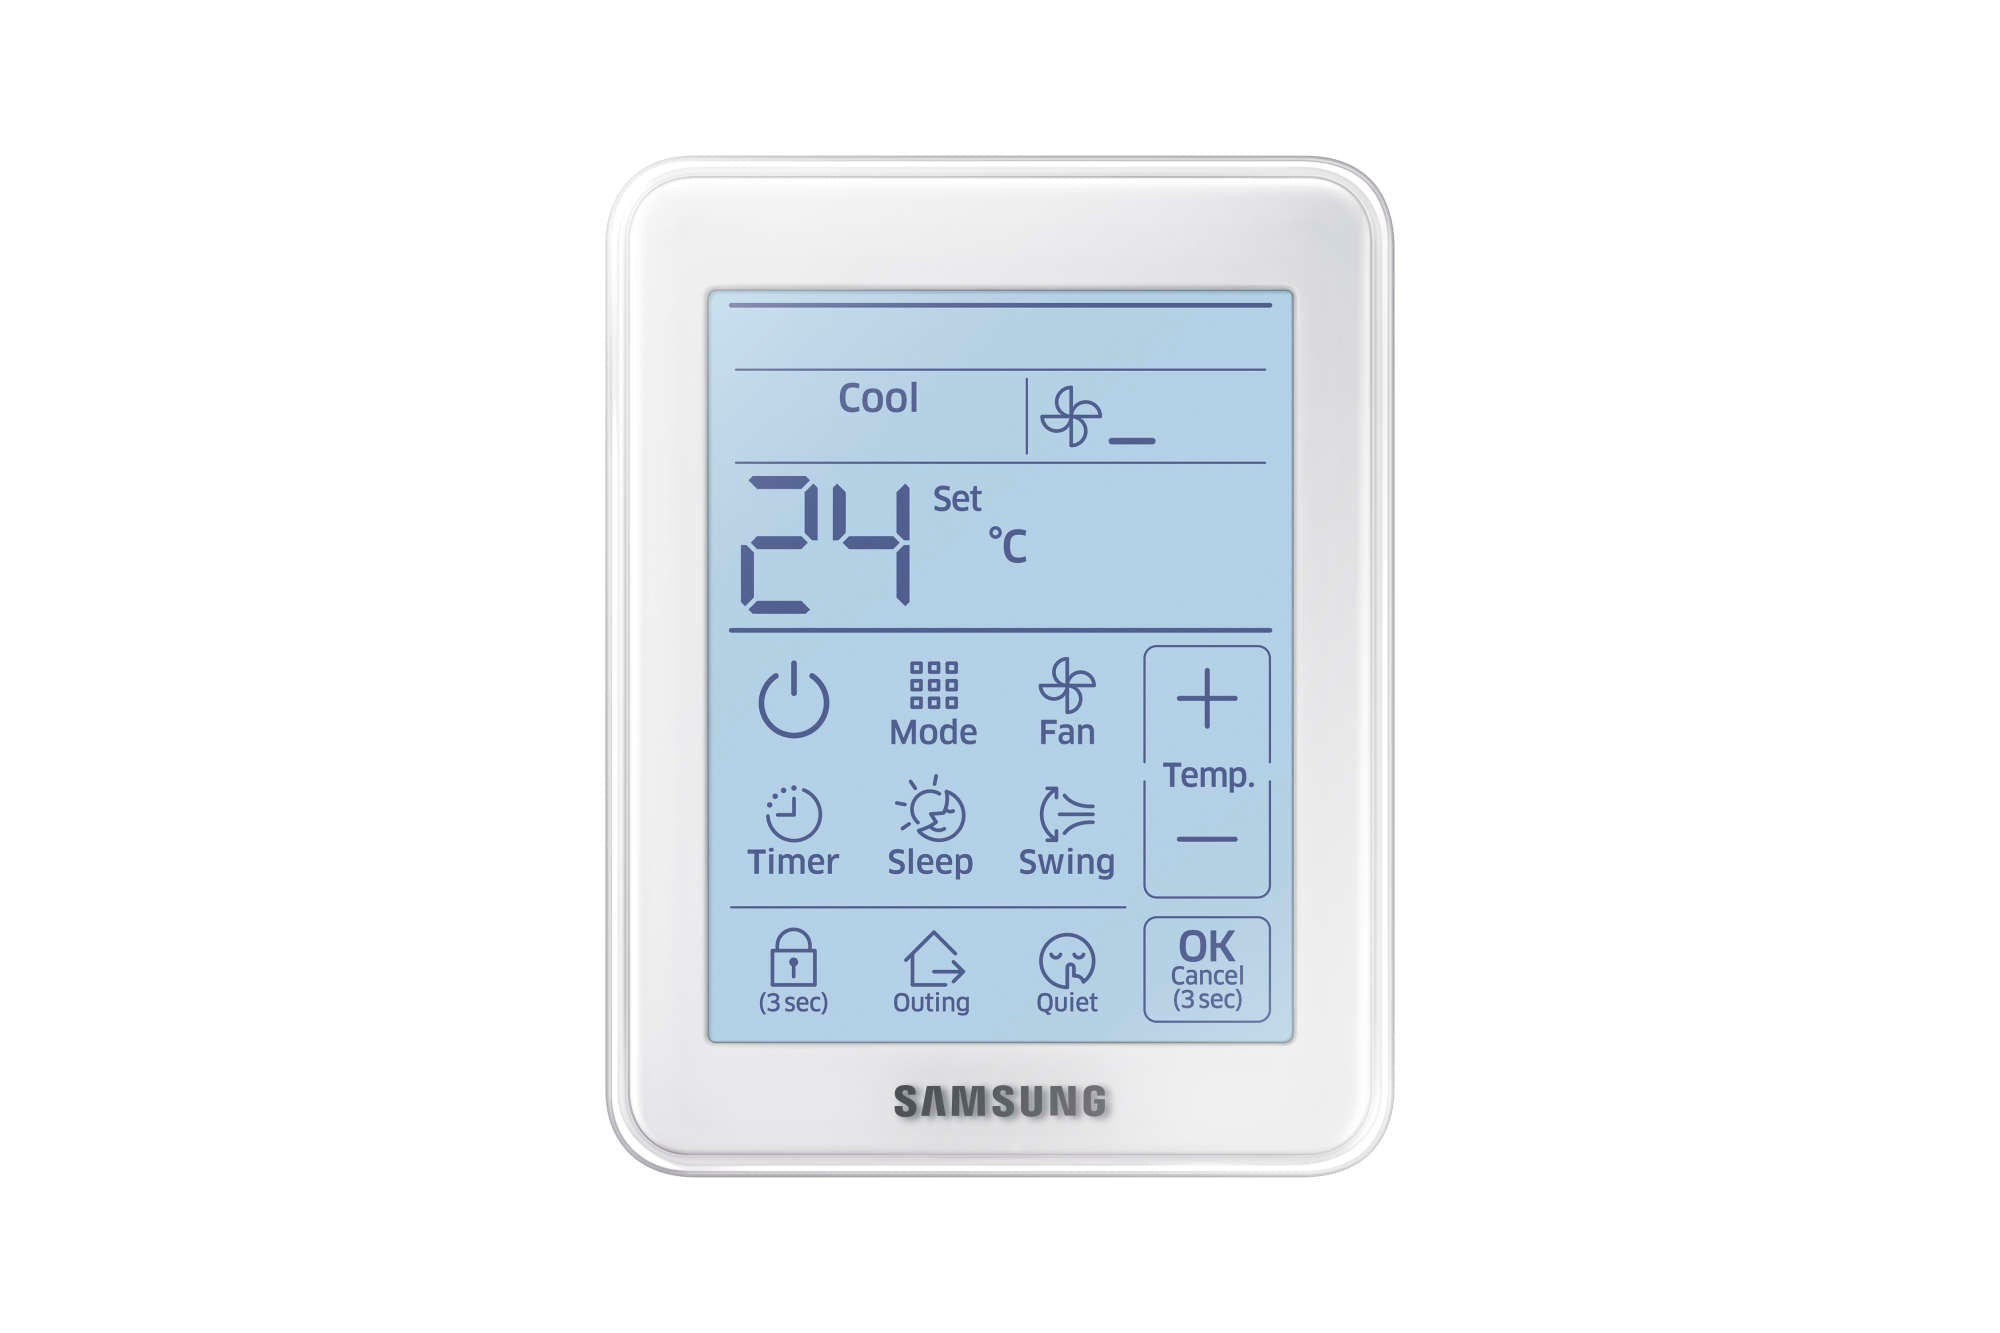 Samsung MWRSH10N Air Conditioner Simple Smart Touch Controller